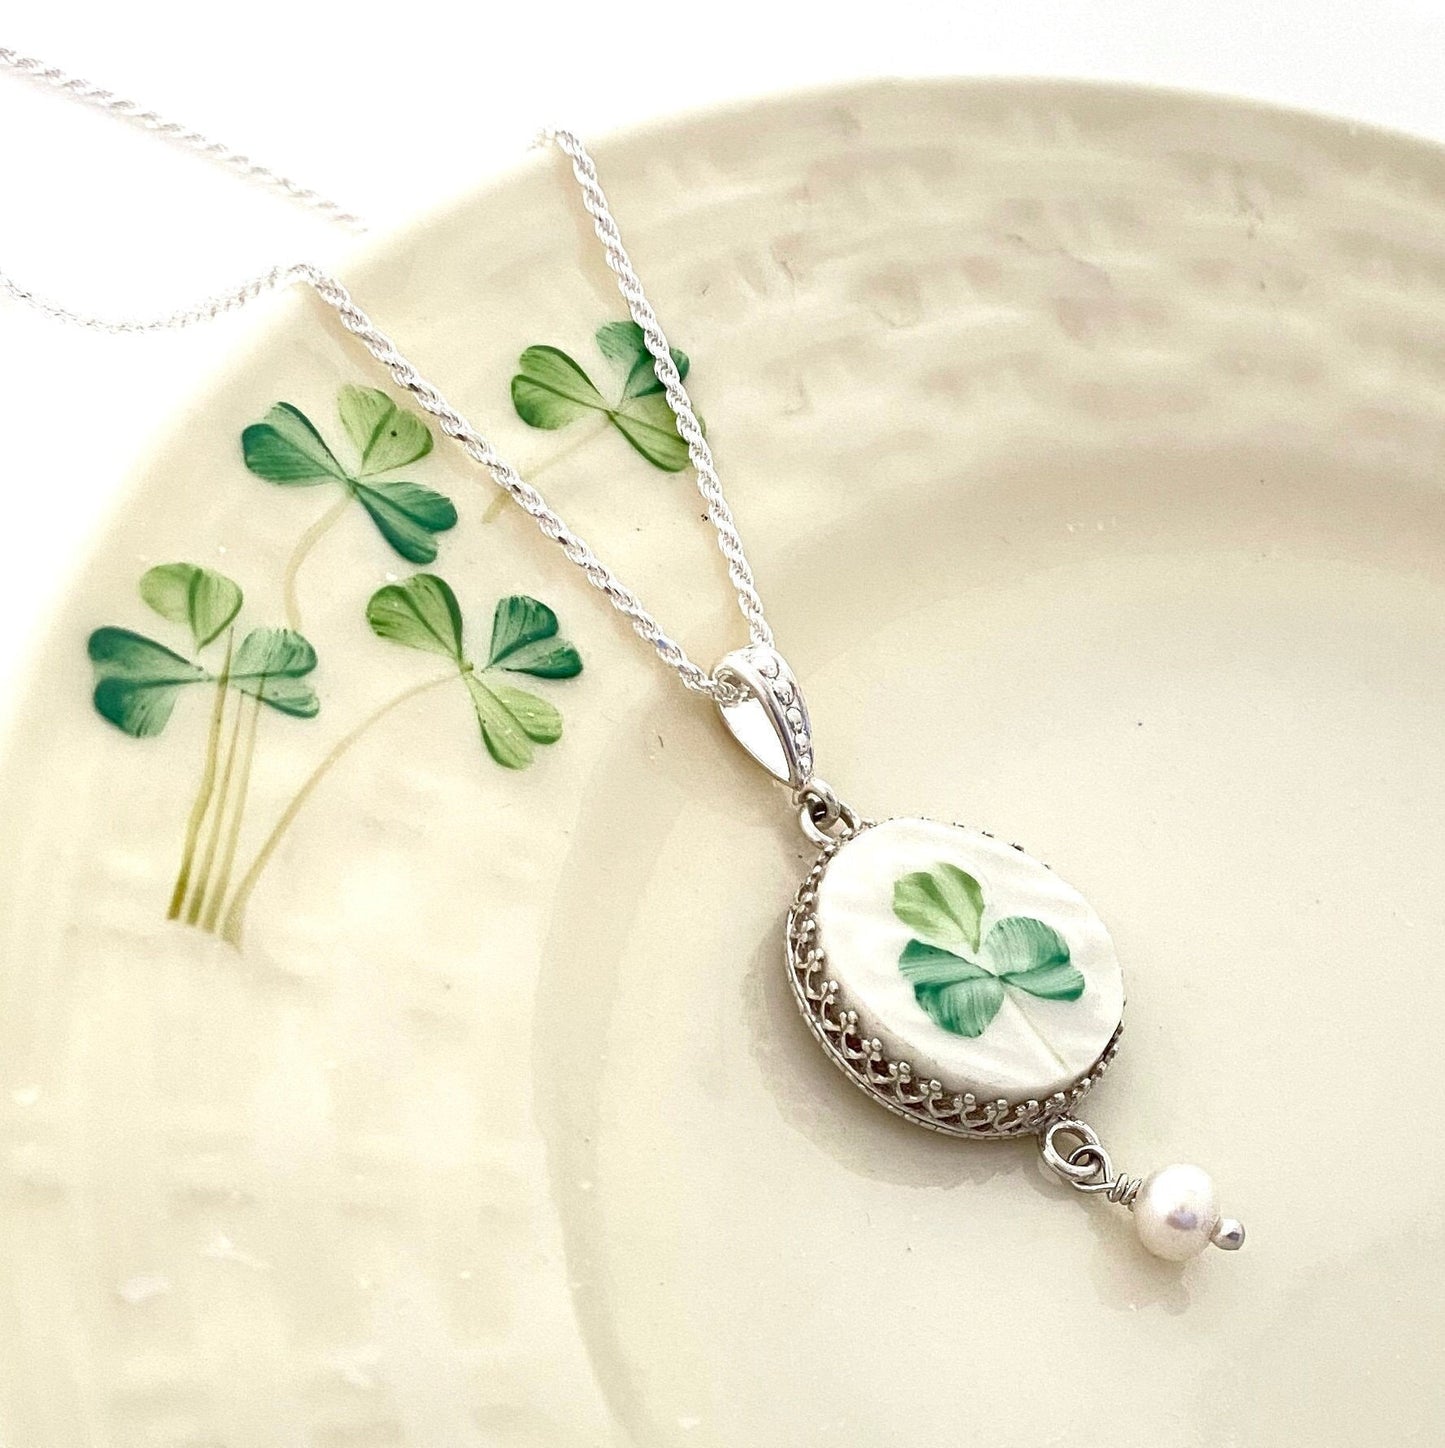 Handmade Irish Jewelry, Belleek Broken China Jewelry, Unique 20th Anniversary Gift for Wife, Celtic Silver Pearl Necklace